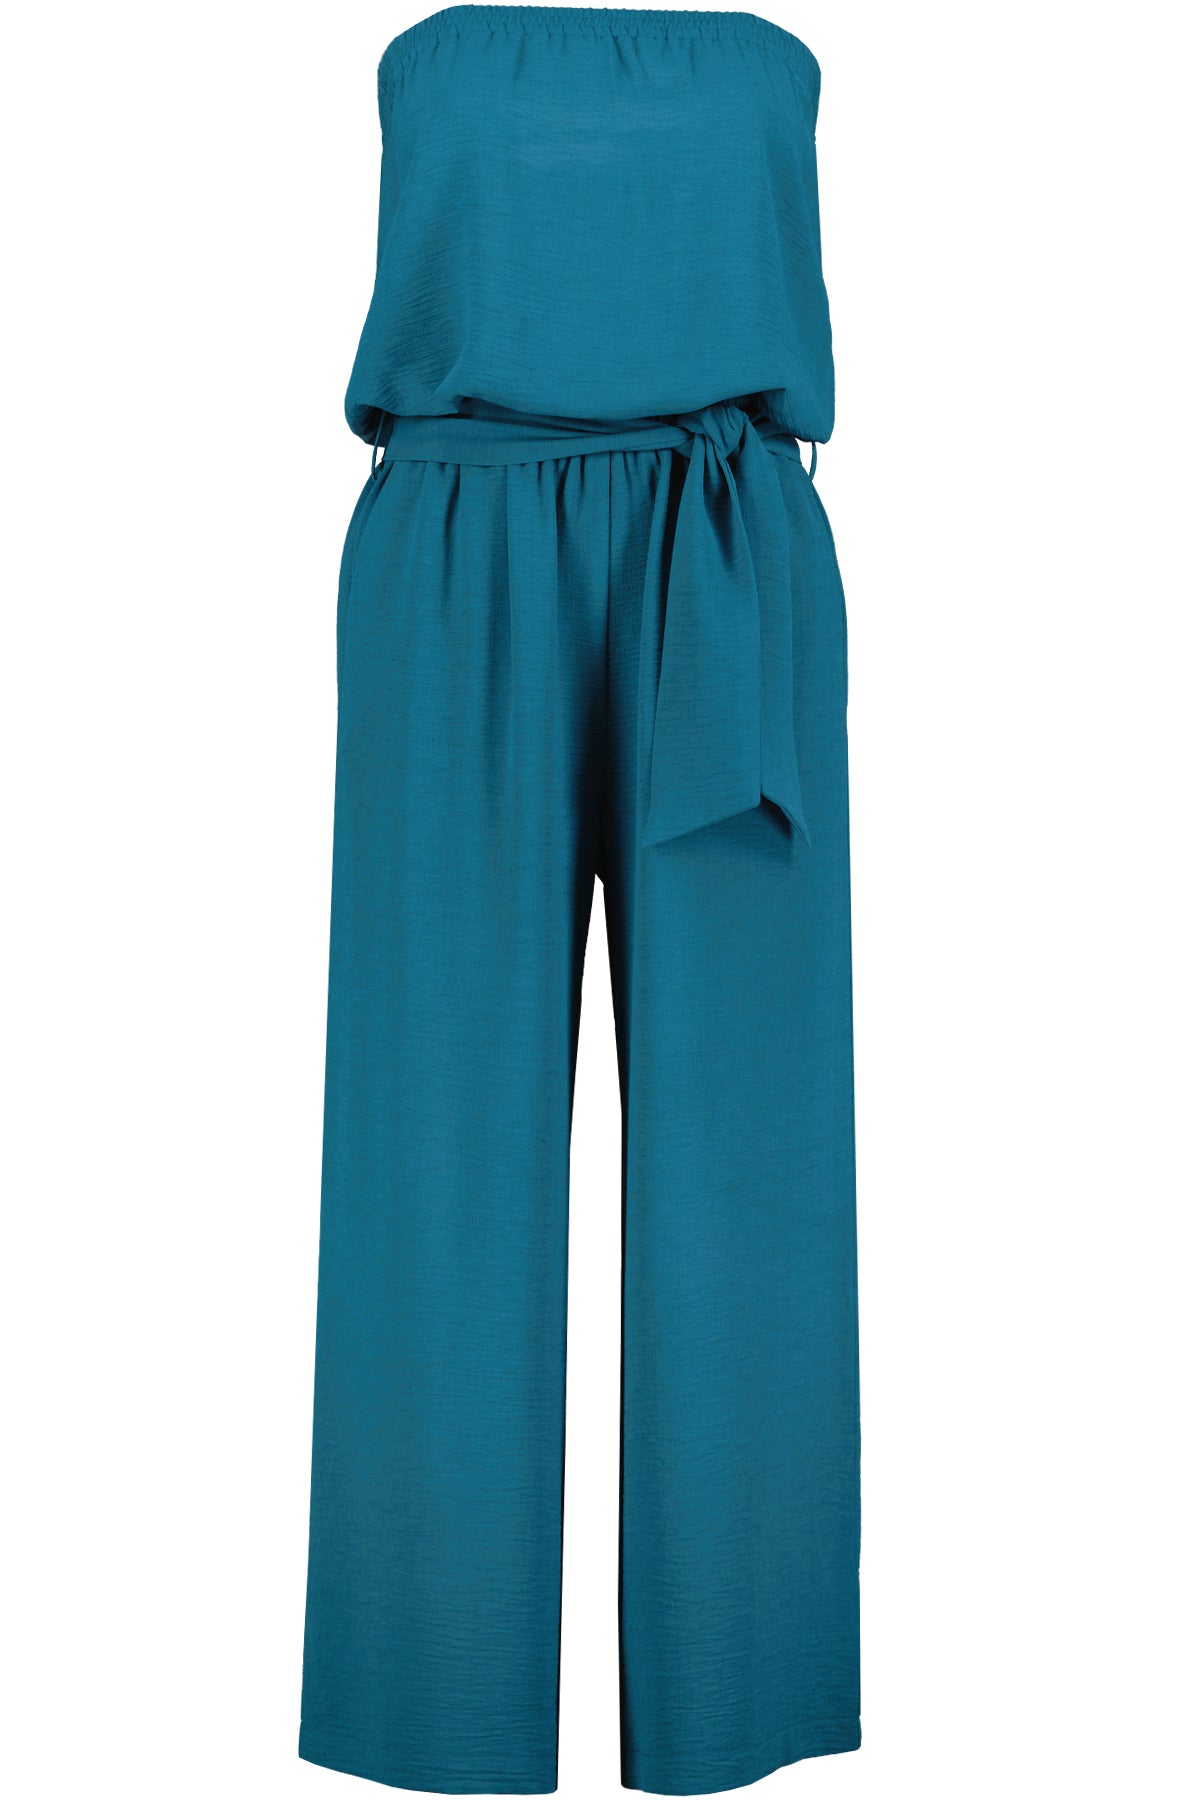 Sea glass colored jumpsuit strapless